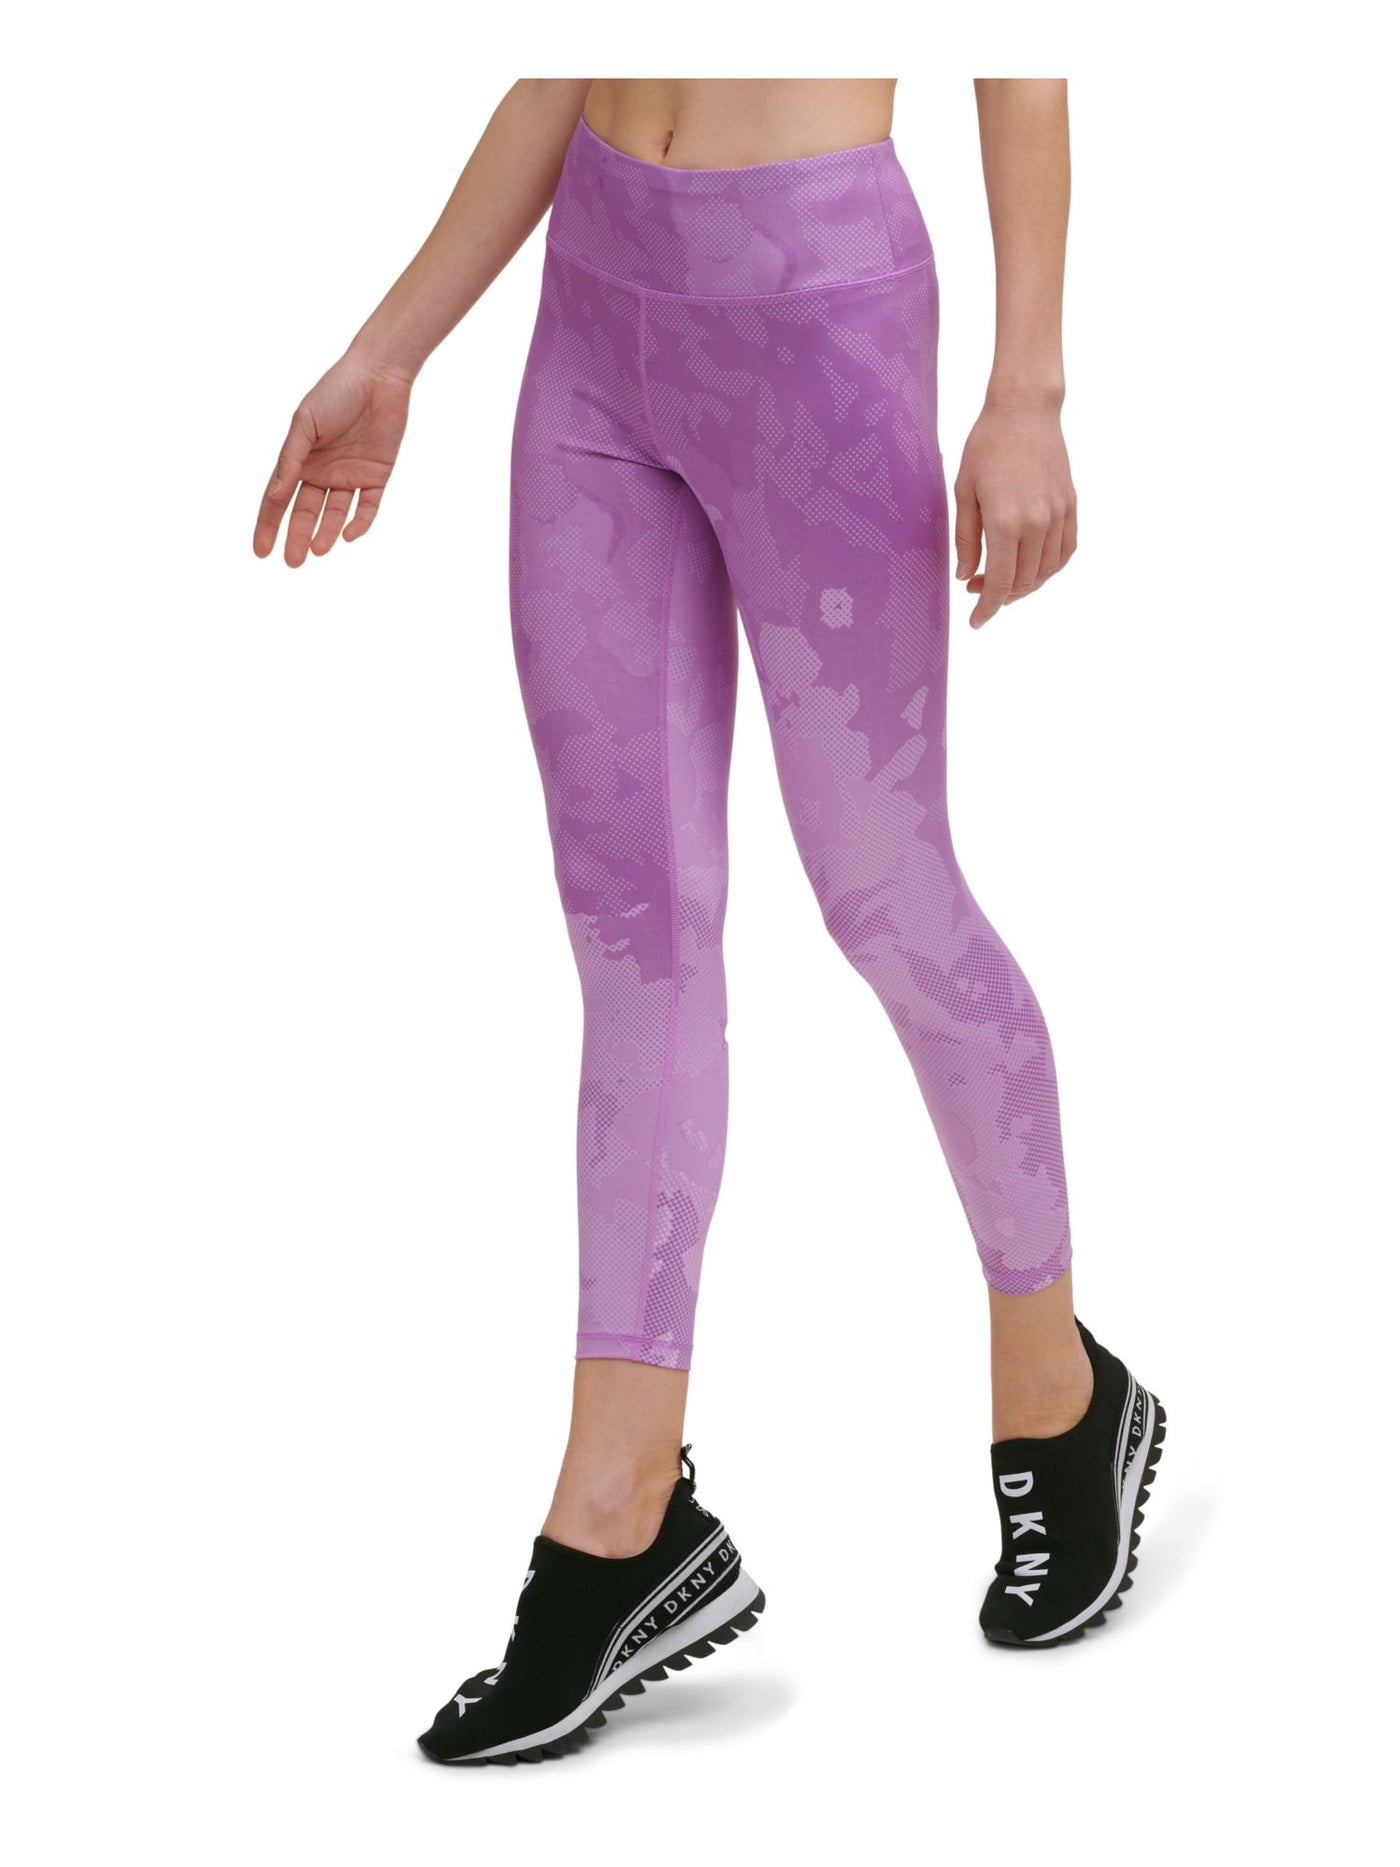 DKNY Womens Purple Moisture Wicking Pocketed Stretch Pull On Style Printed Active Wear High Waist Leggings XS